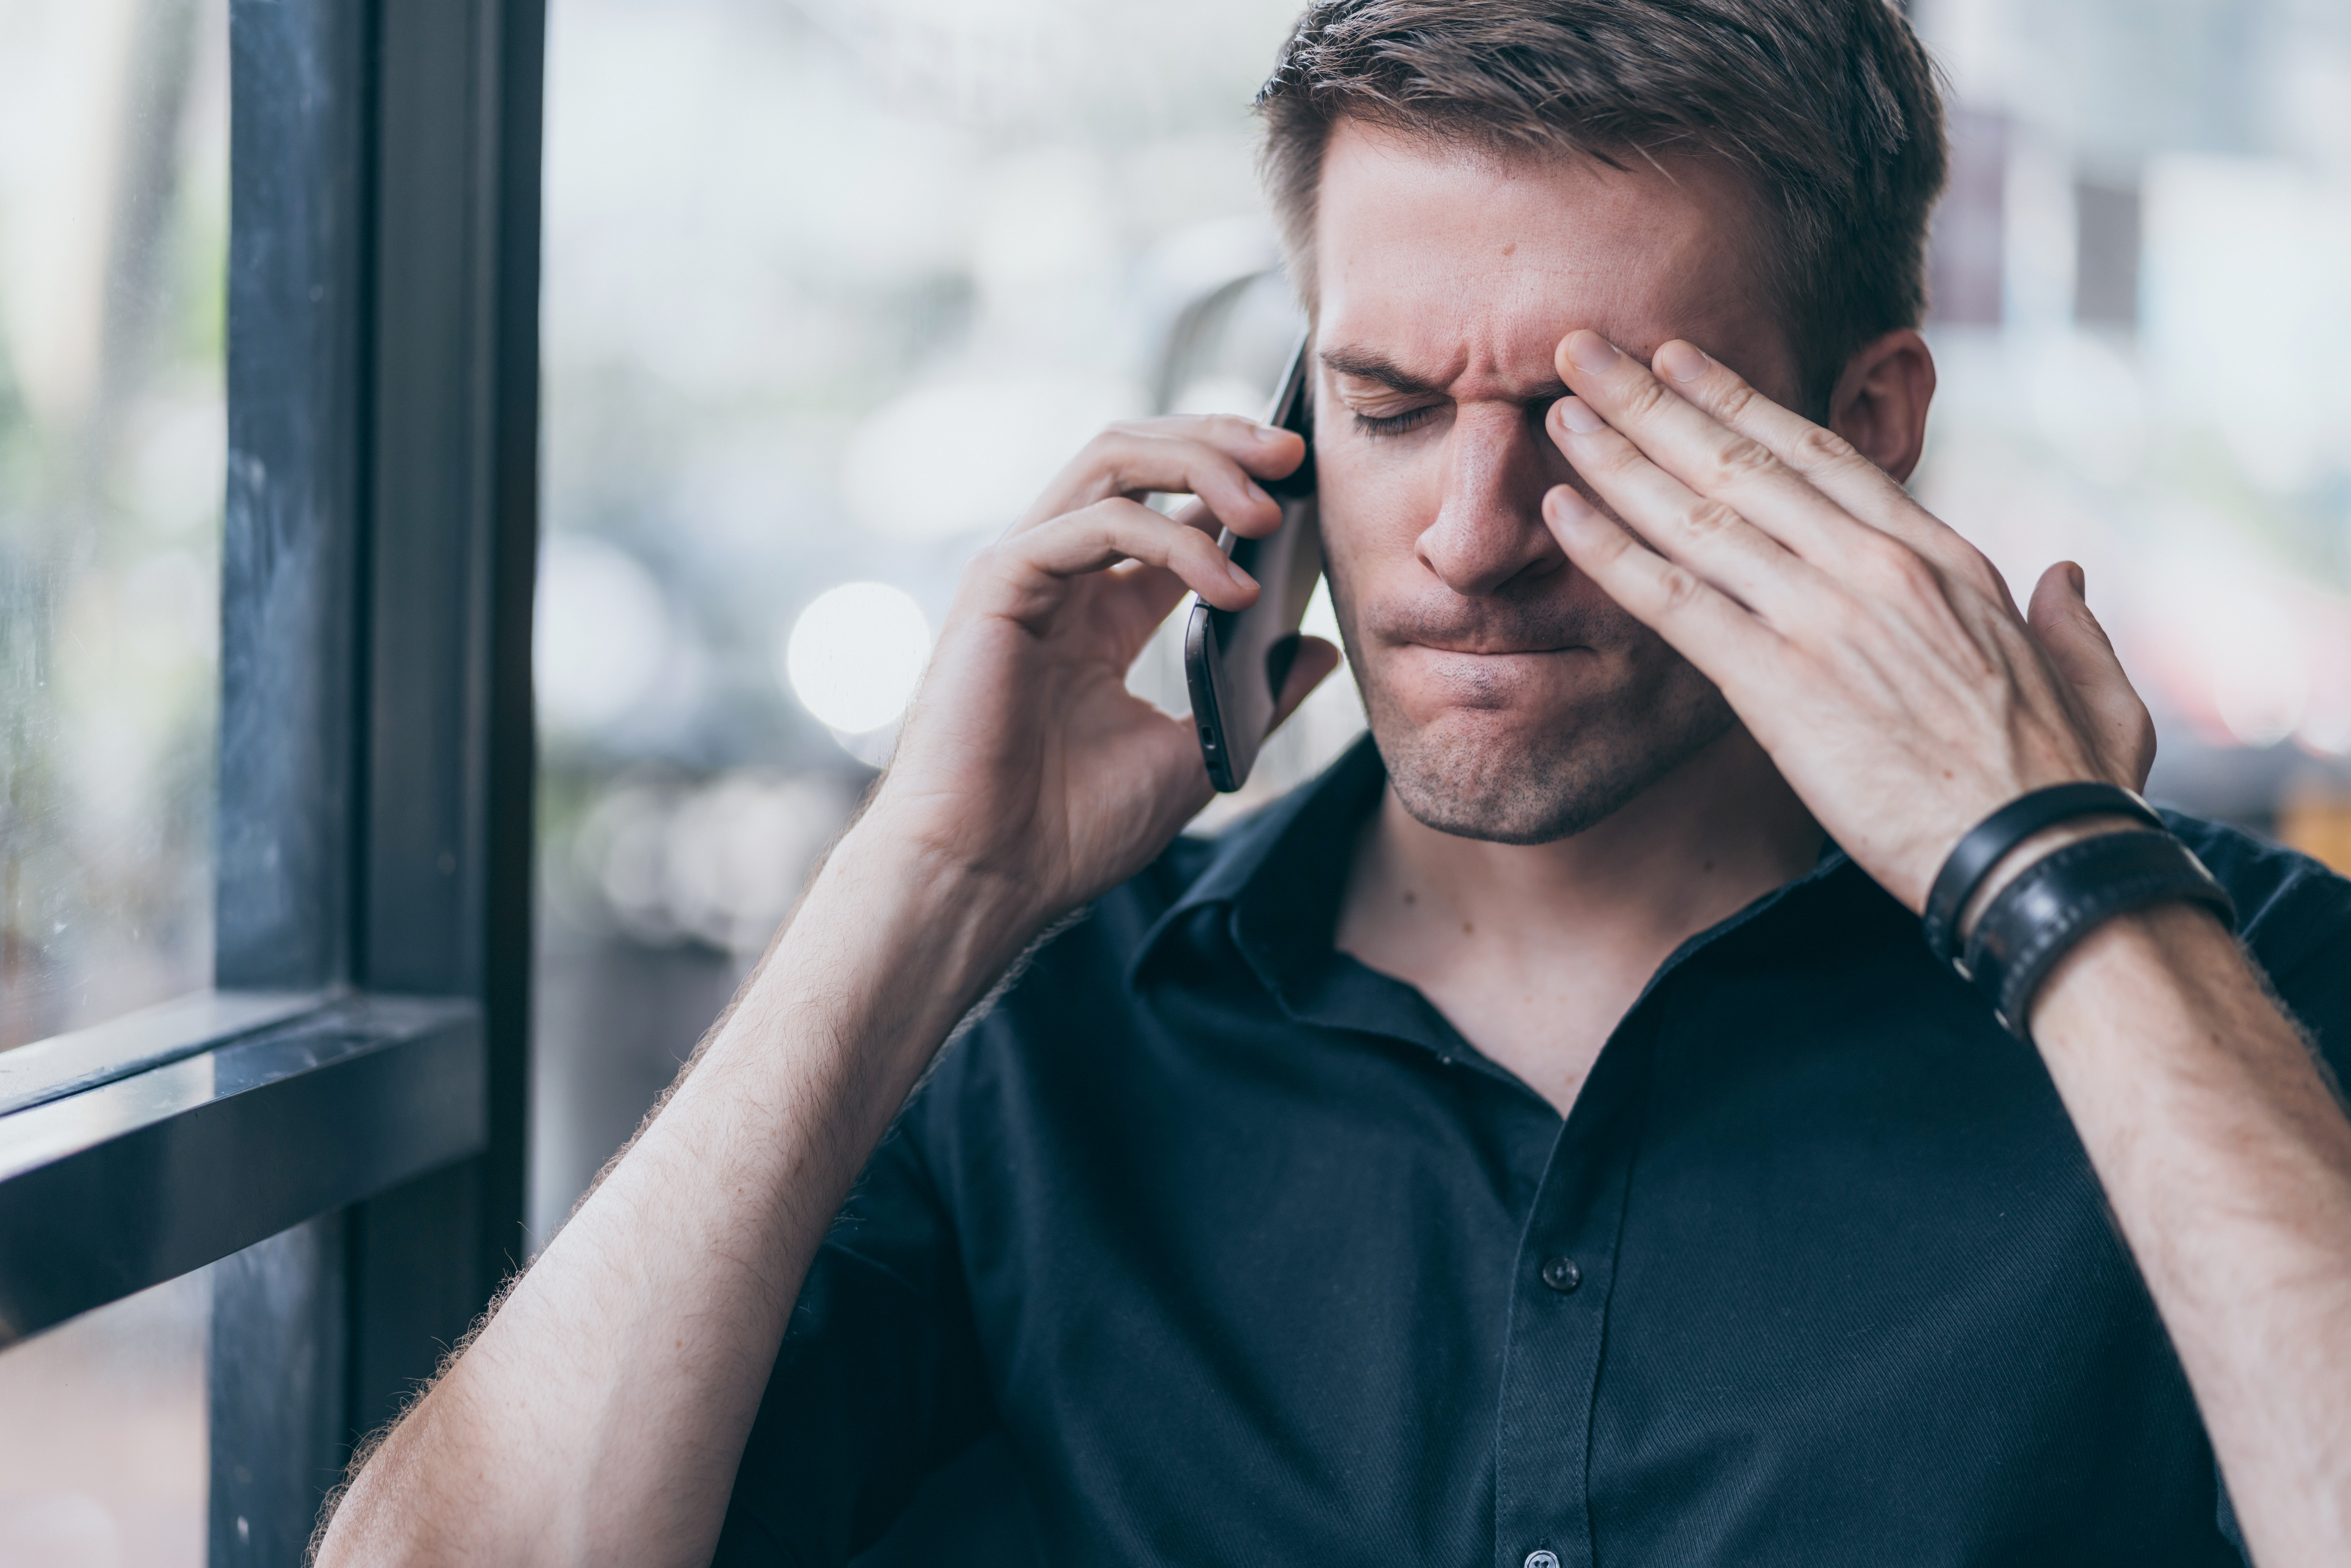 A stressful man talking on the phone | Source: Shutterstock